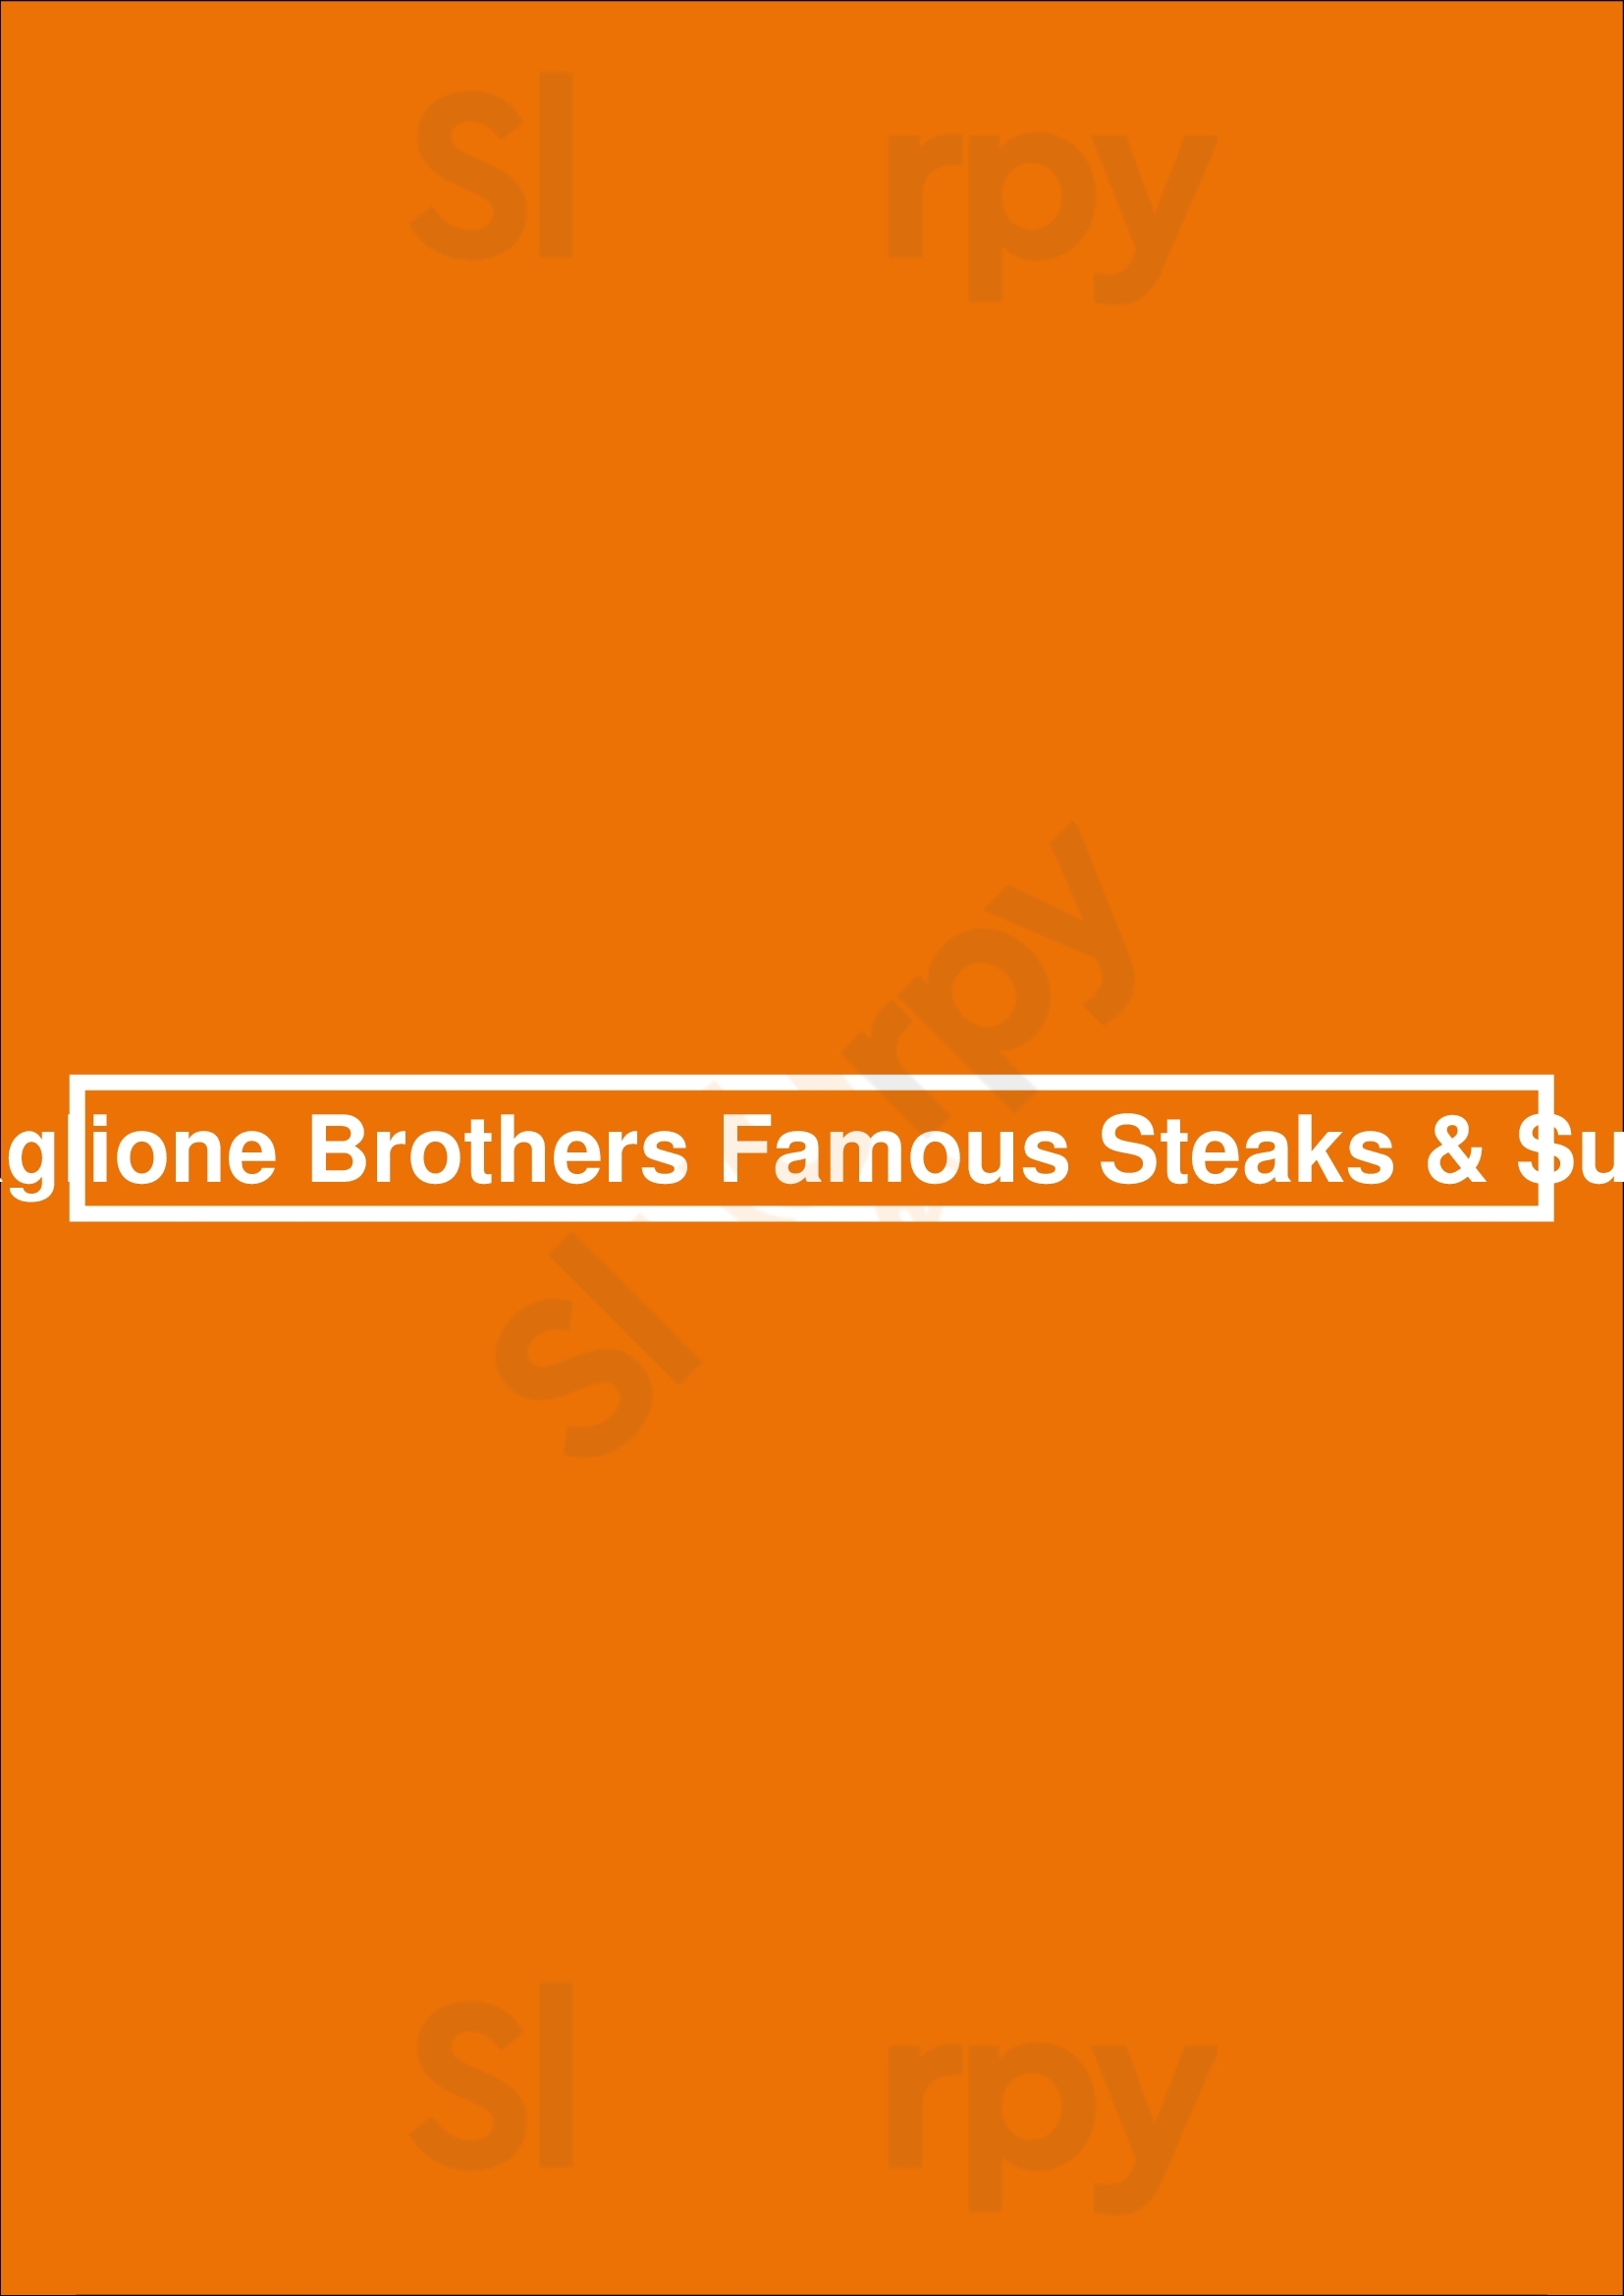 Gaglione Brothers Famous Steaks & Subs San Diego Menu - 1